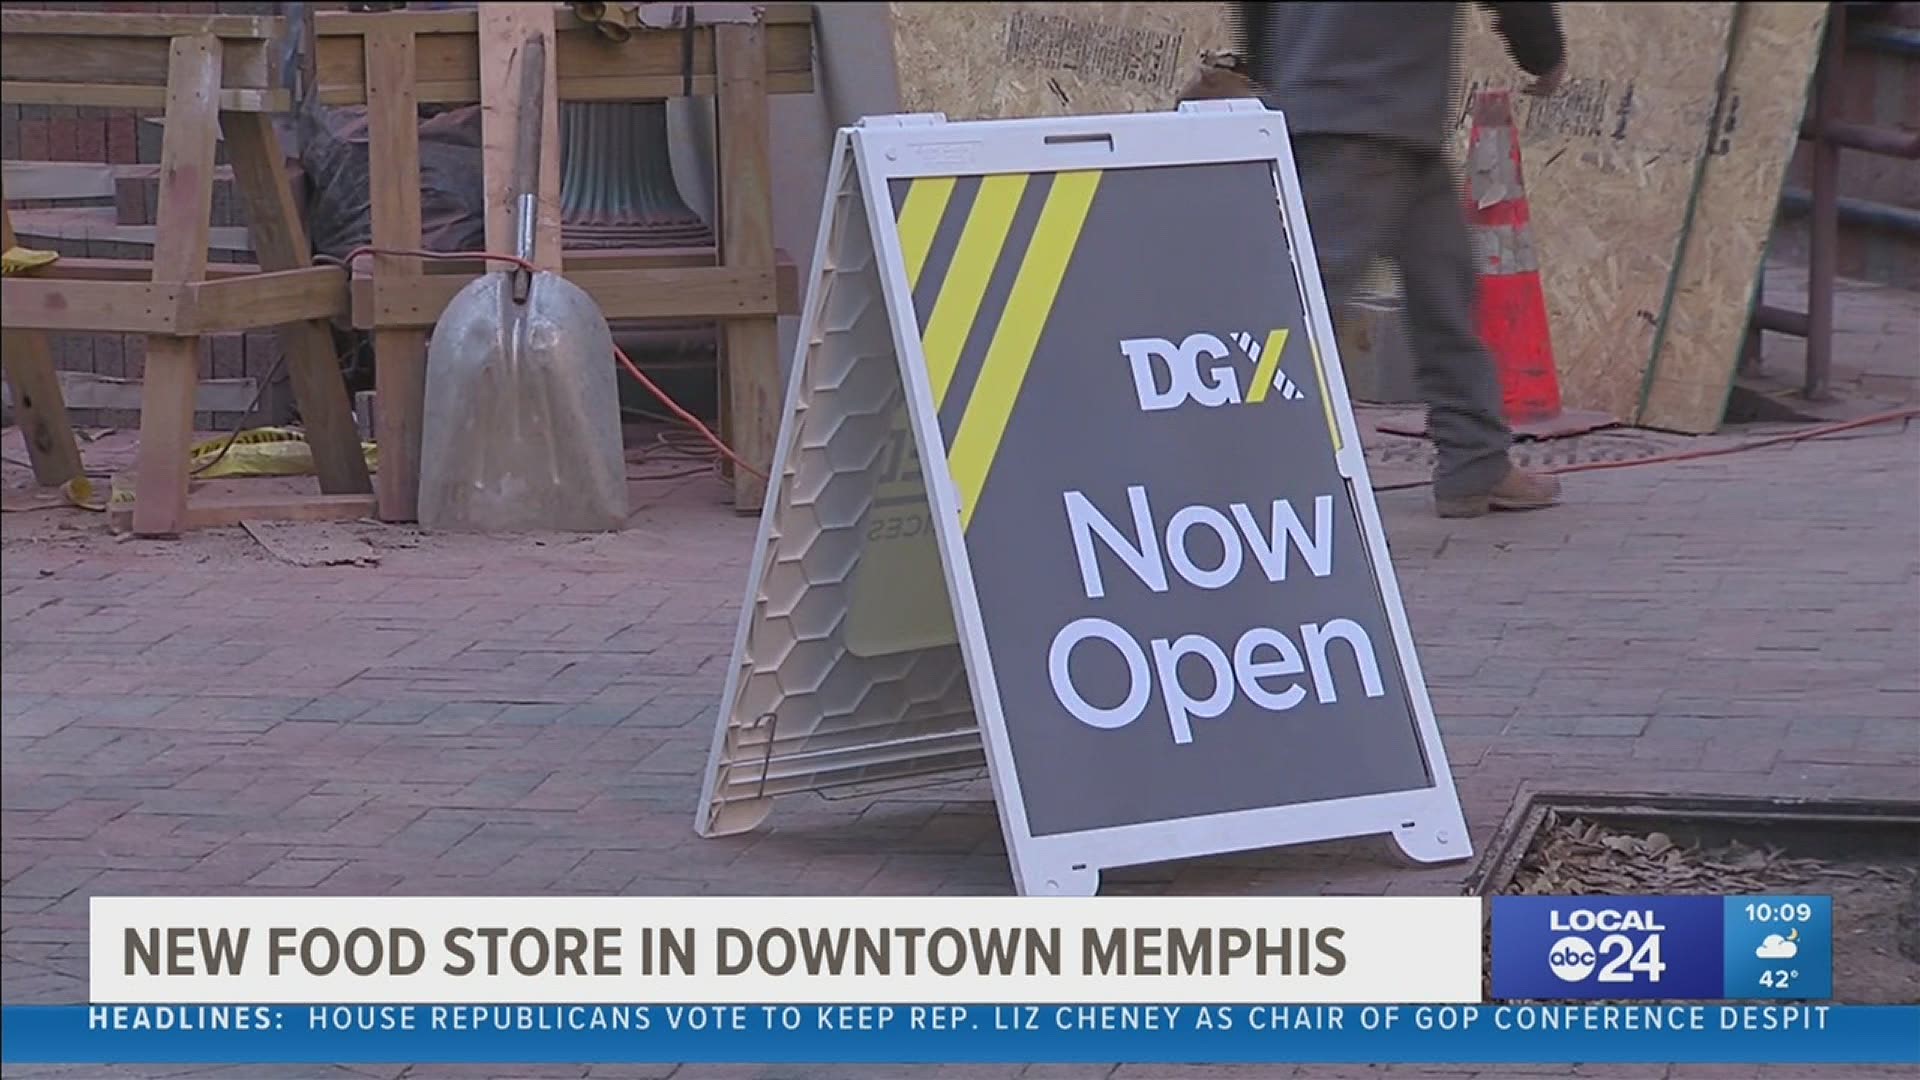 Downtown Memphis hasn't had a grocery store in nearly a decade. A new Dollar General Store offers a new food source for Downtowners.